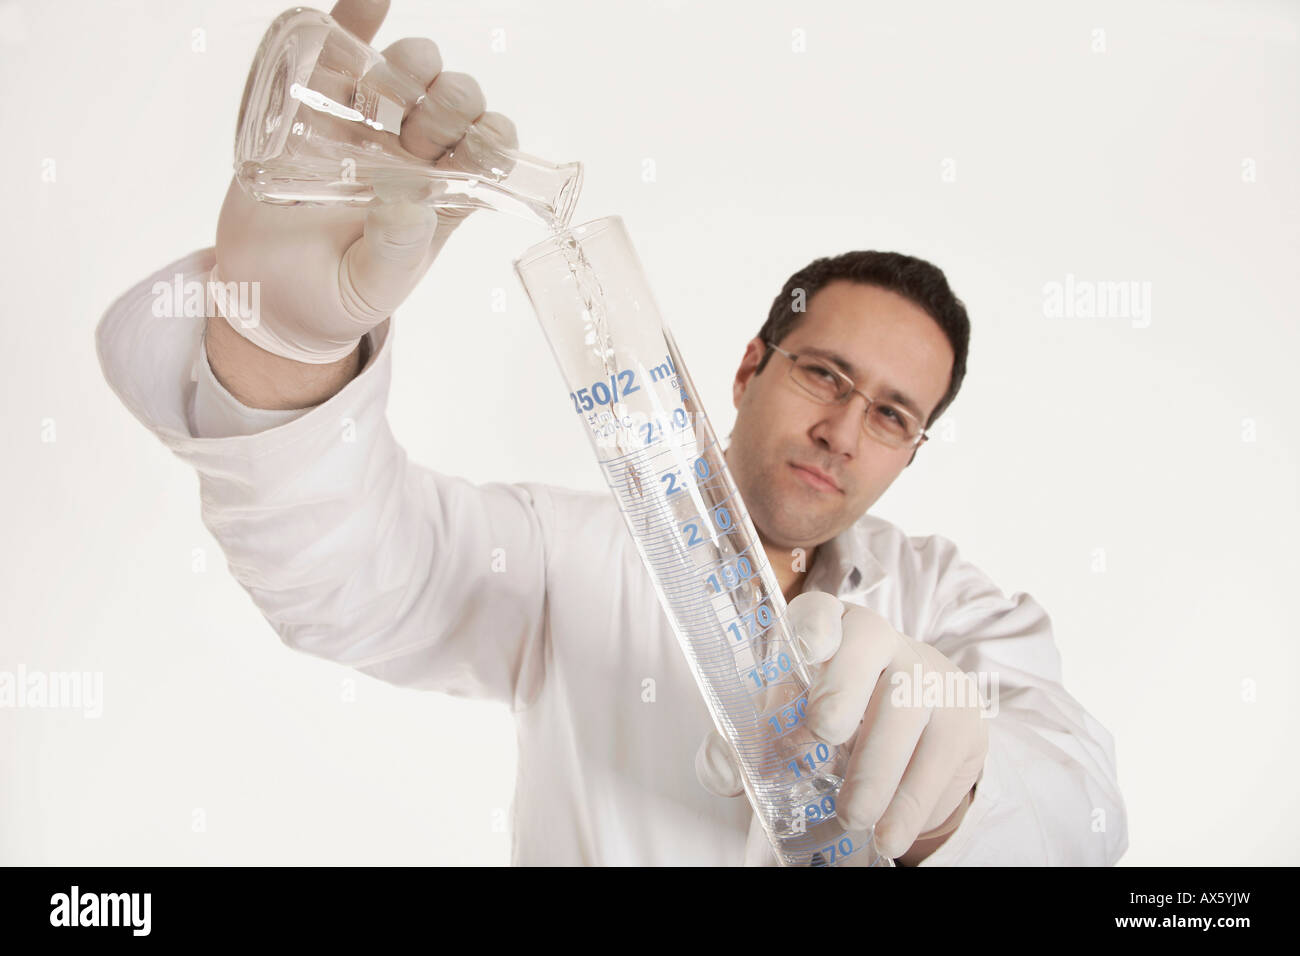 Chemist pouring liquid into a flask Stock Photo